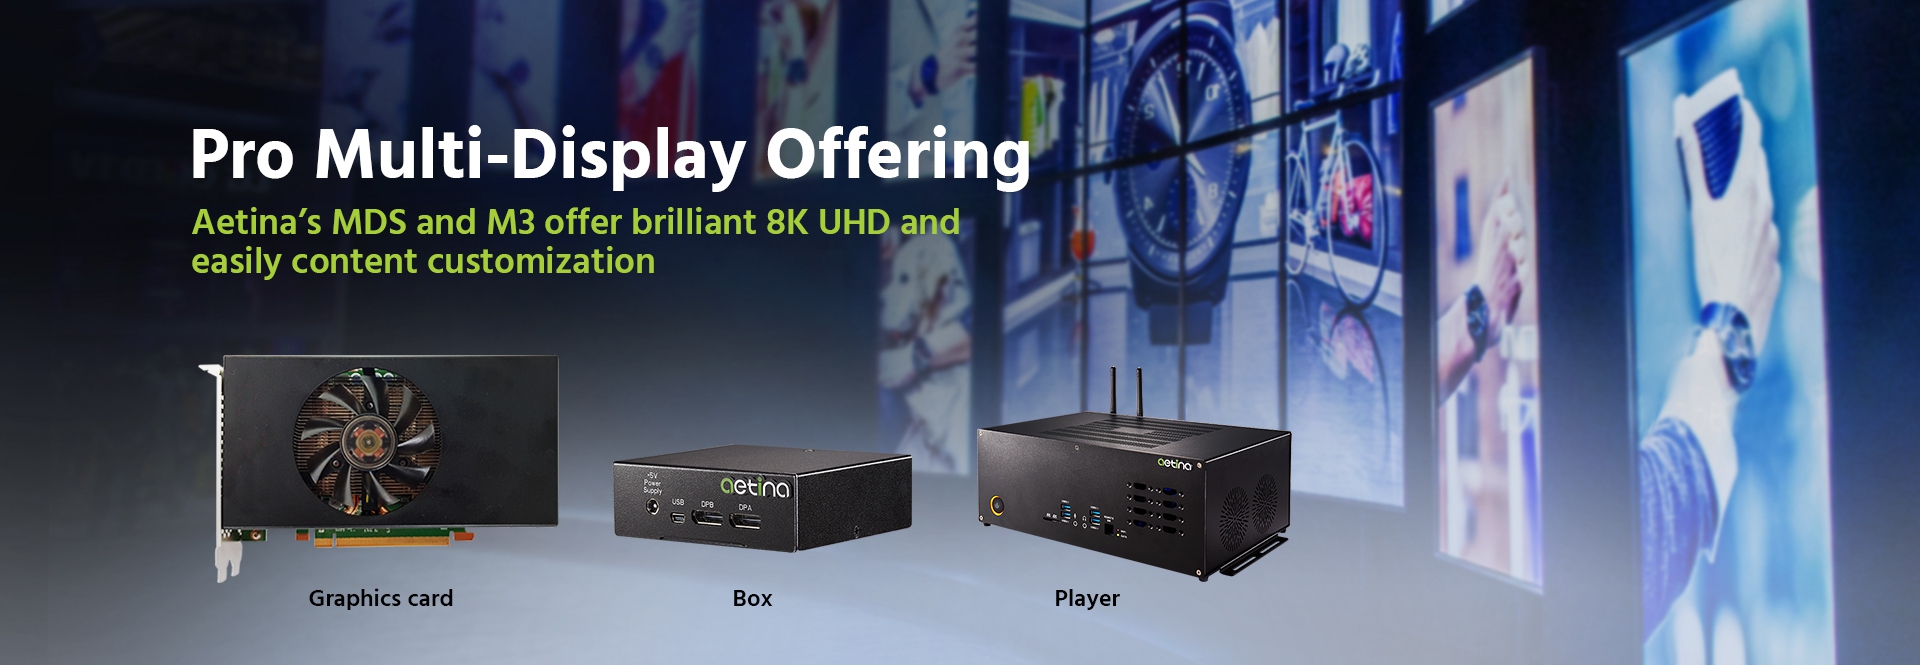 Aetina MDS and M3 offer brilliant 8K UHD and easily content customization